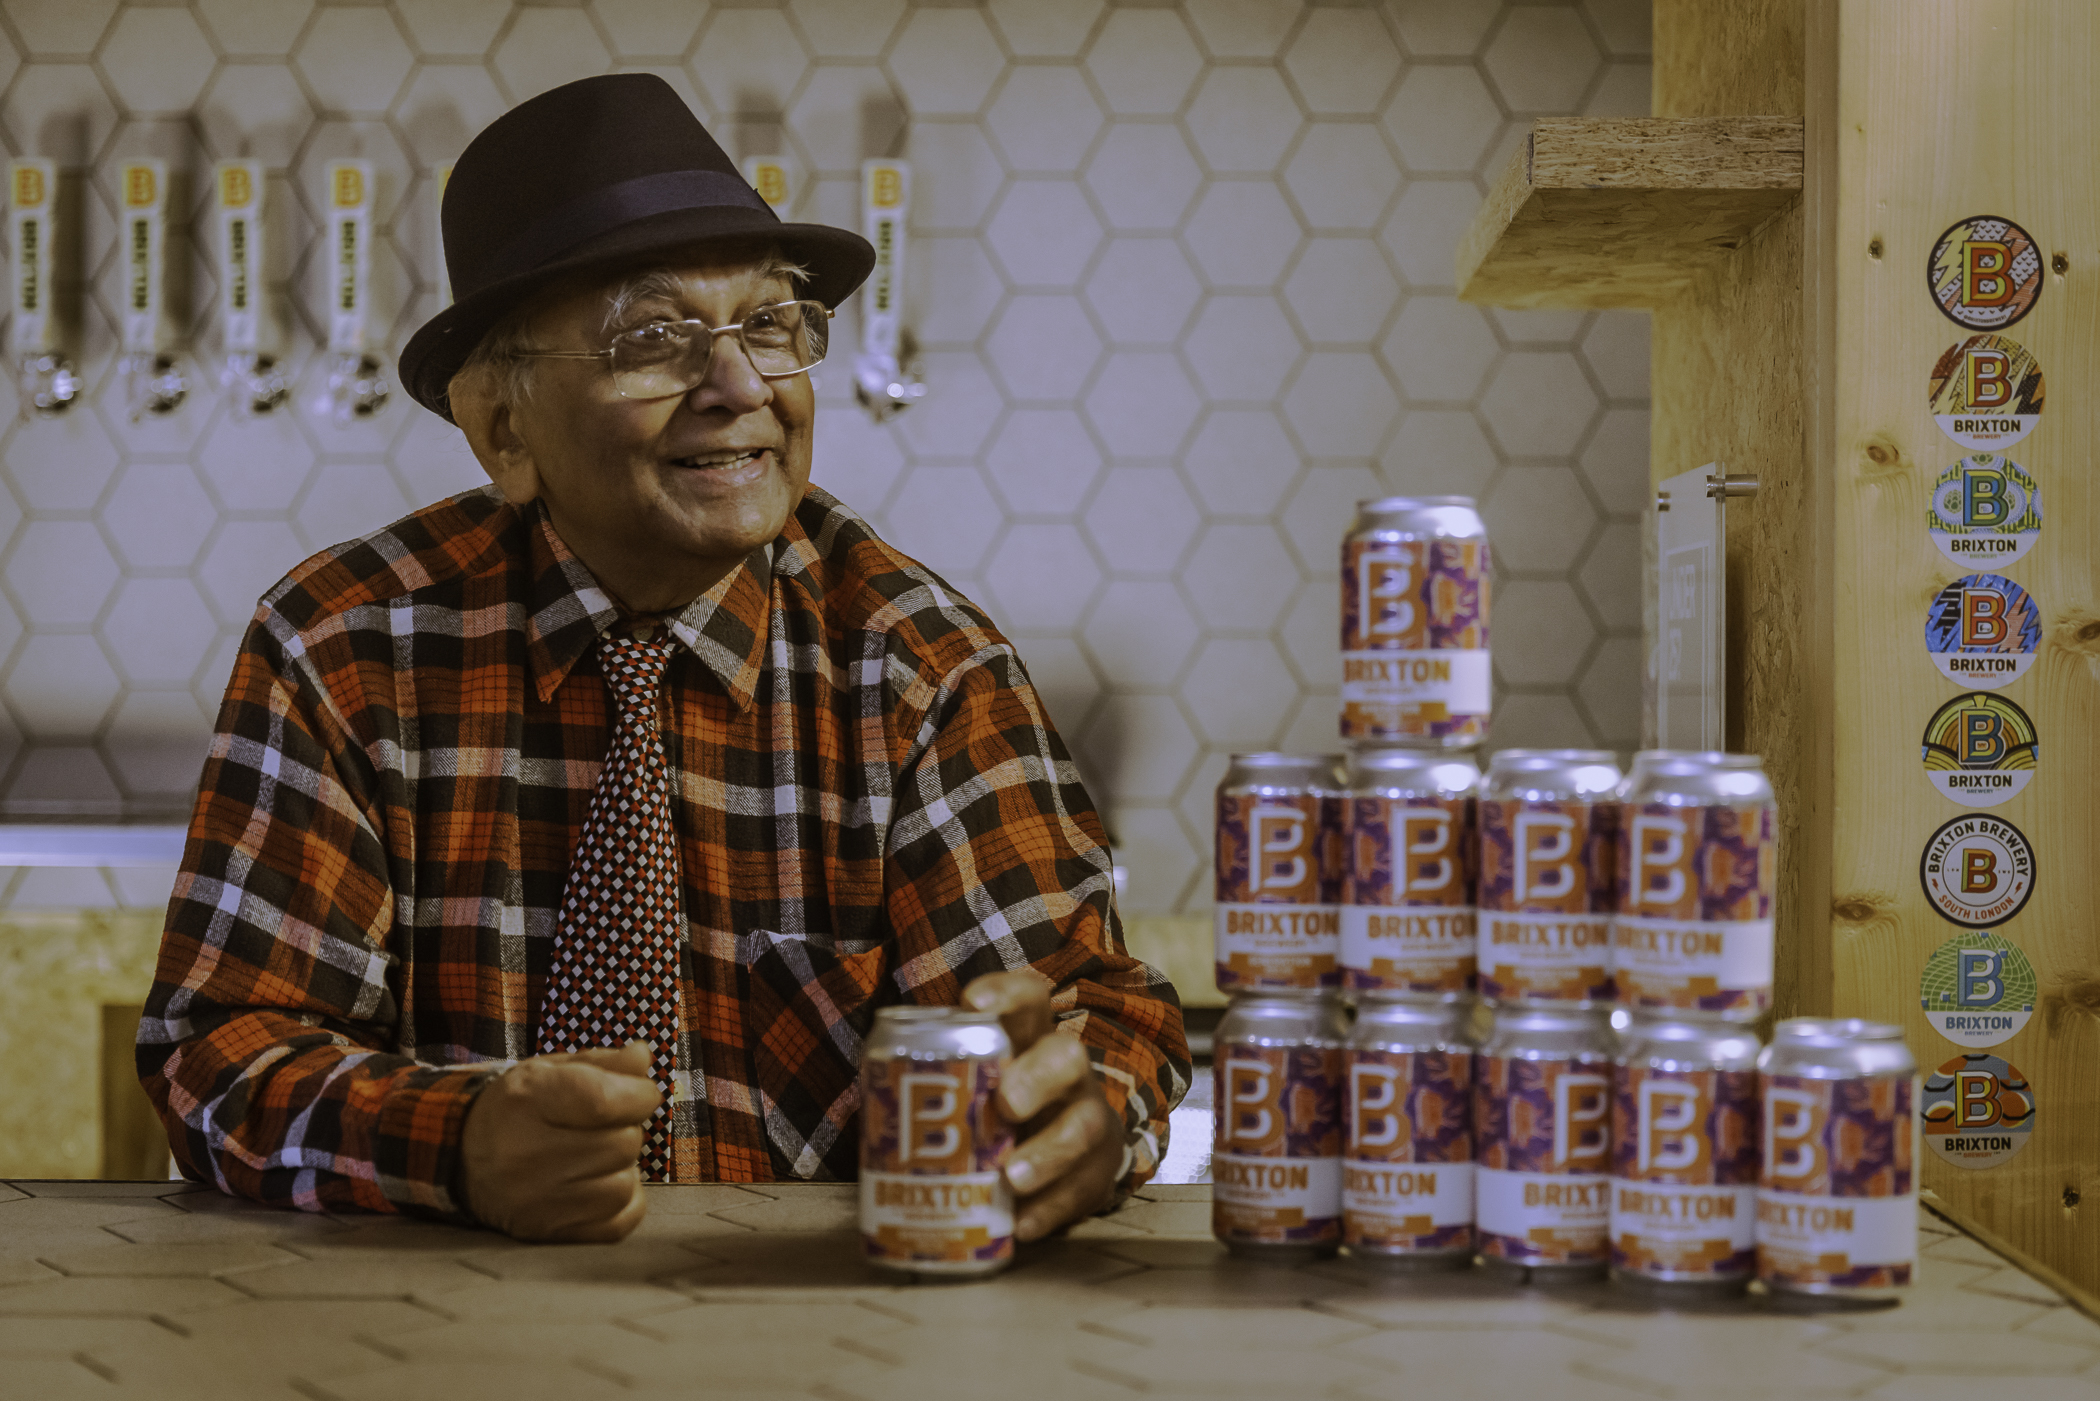 Brixton Brewery Launches Beer For Age UK.